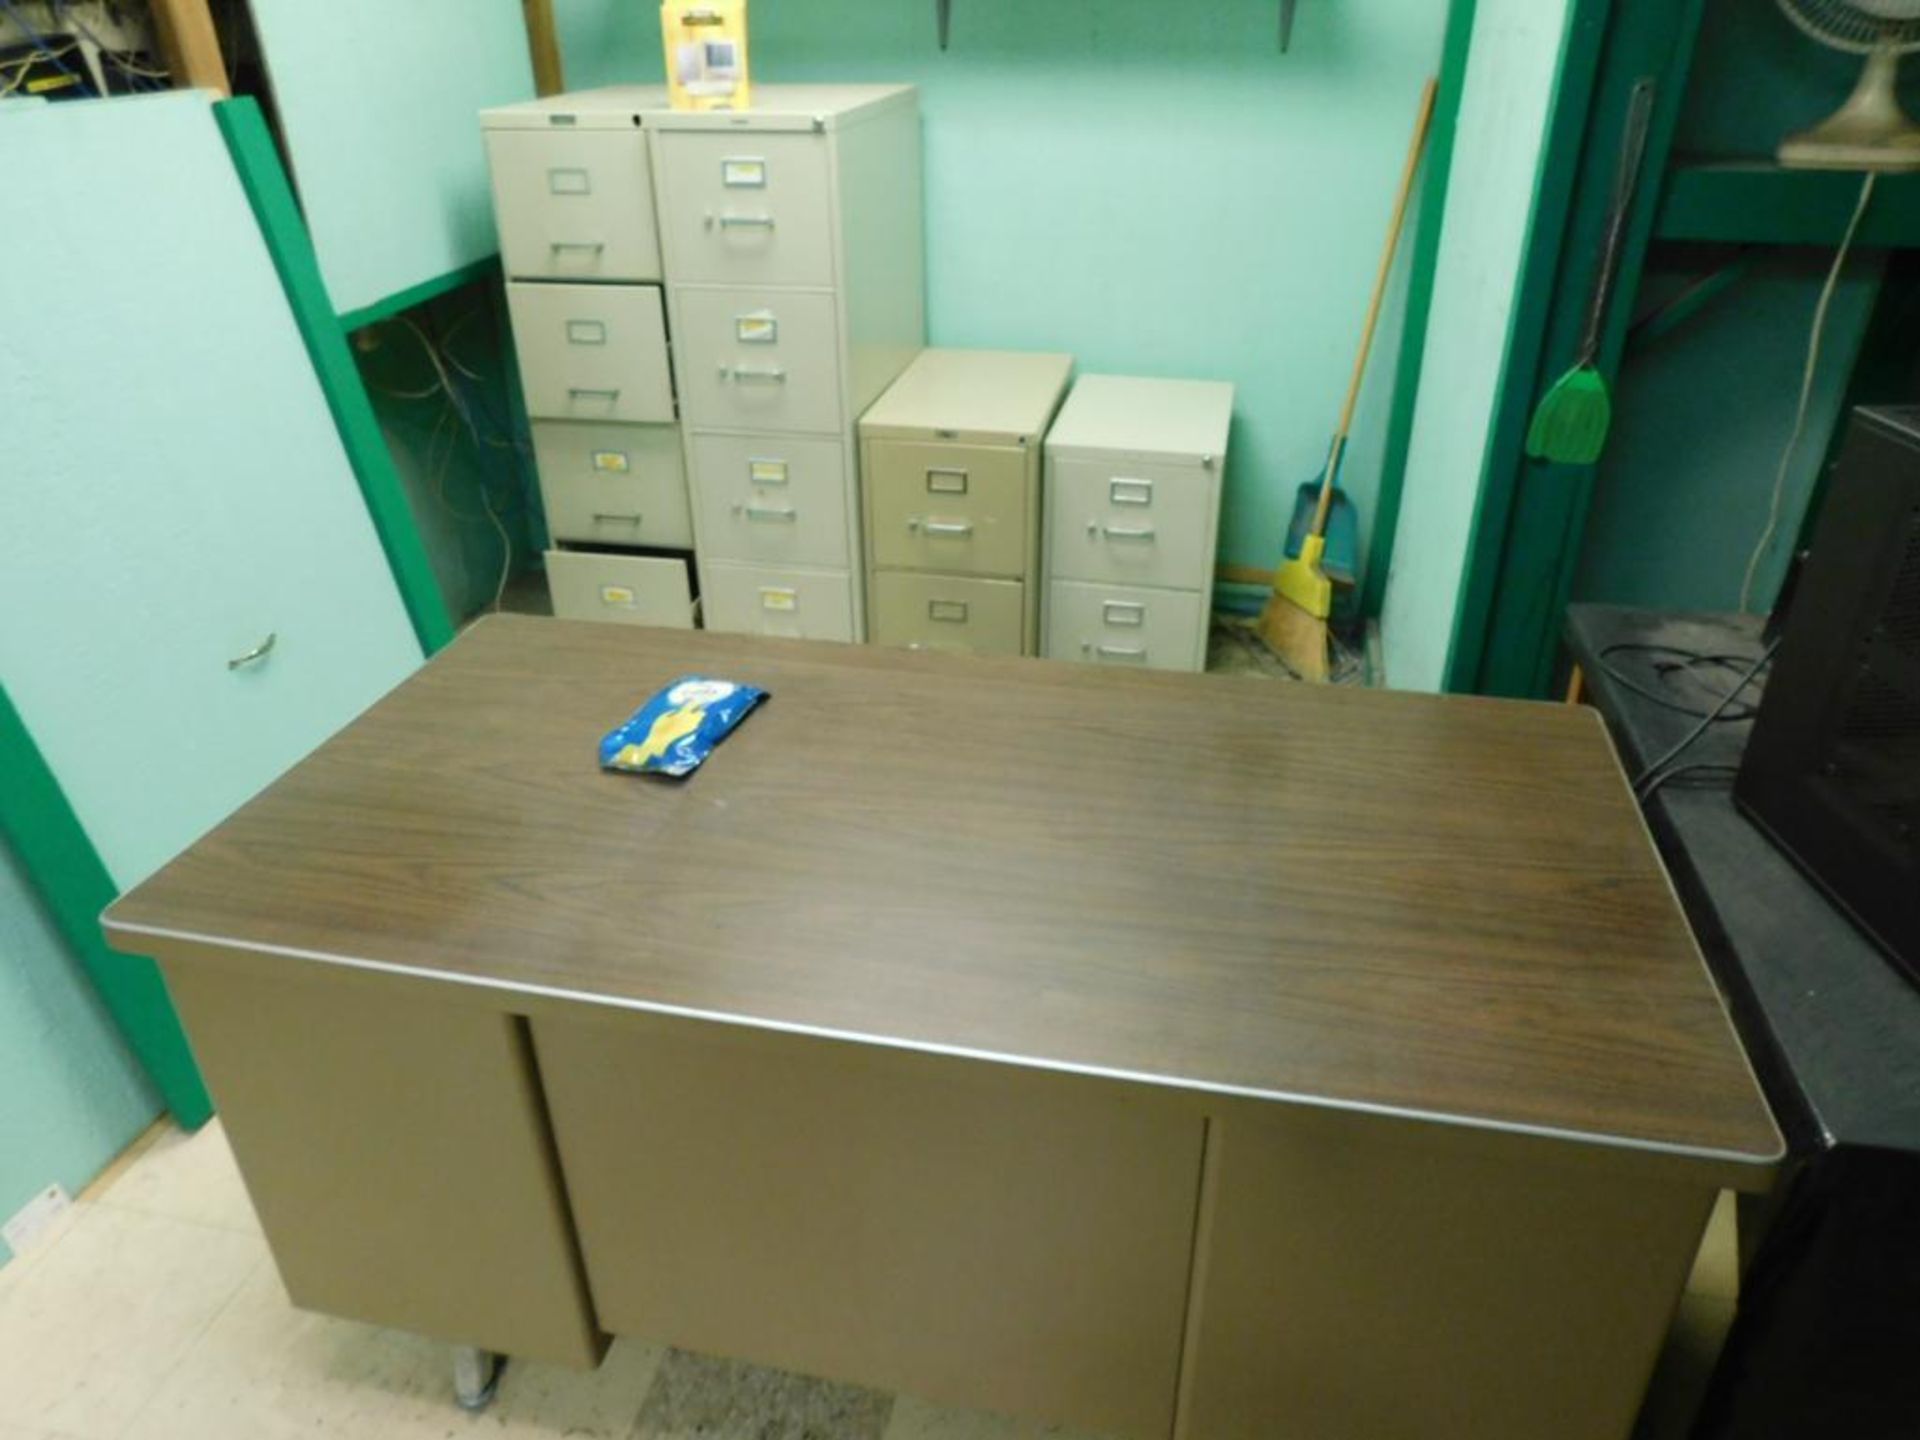 LOT: Contents of Offices: Desks, Chairs, File Cabinets, Monitors (NO TOWERS OR PRINTERS) - Image 5 of 11